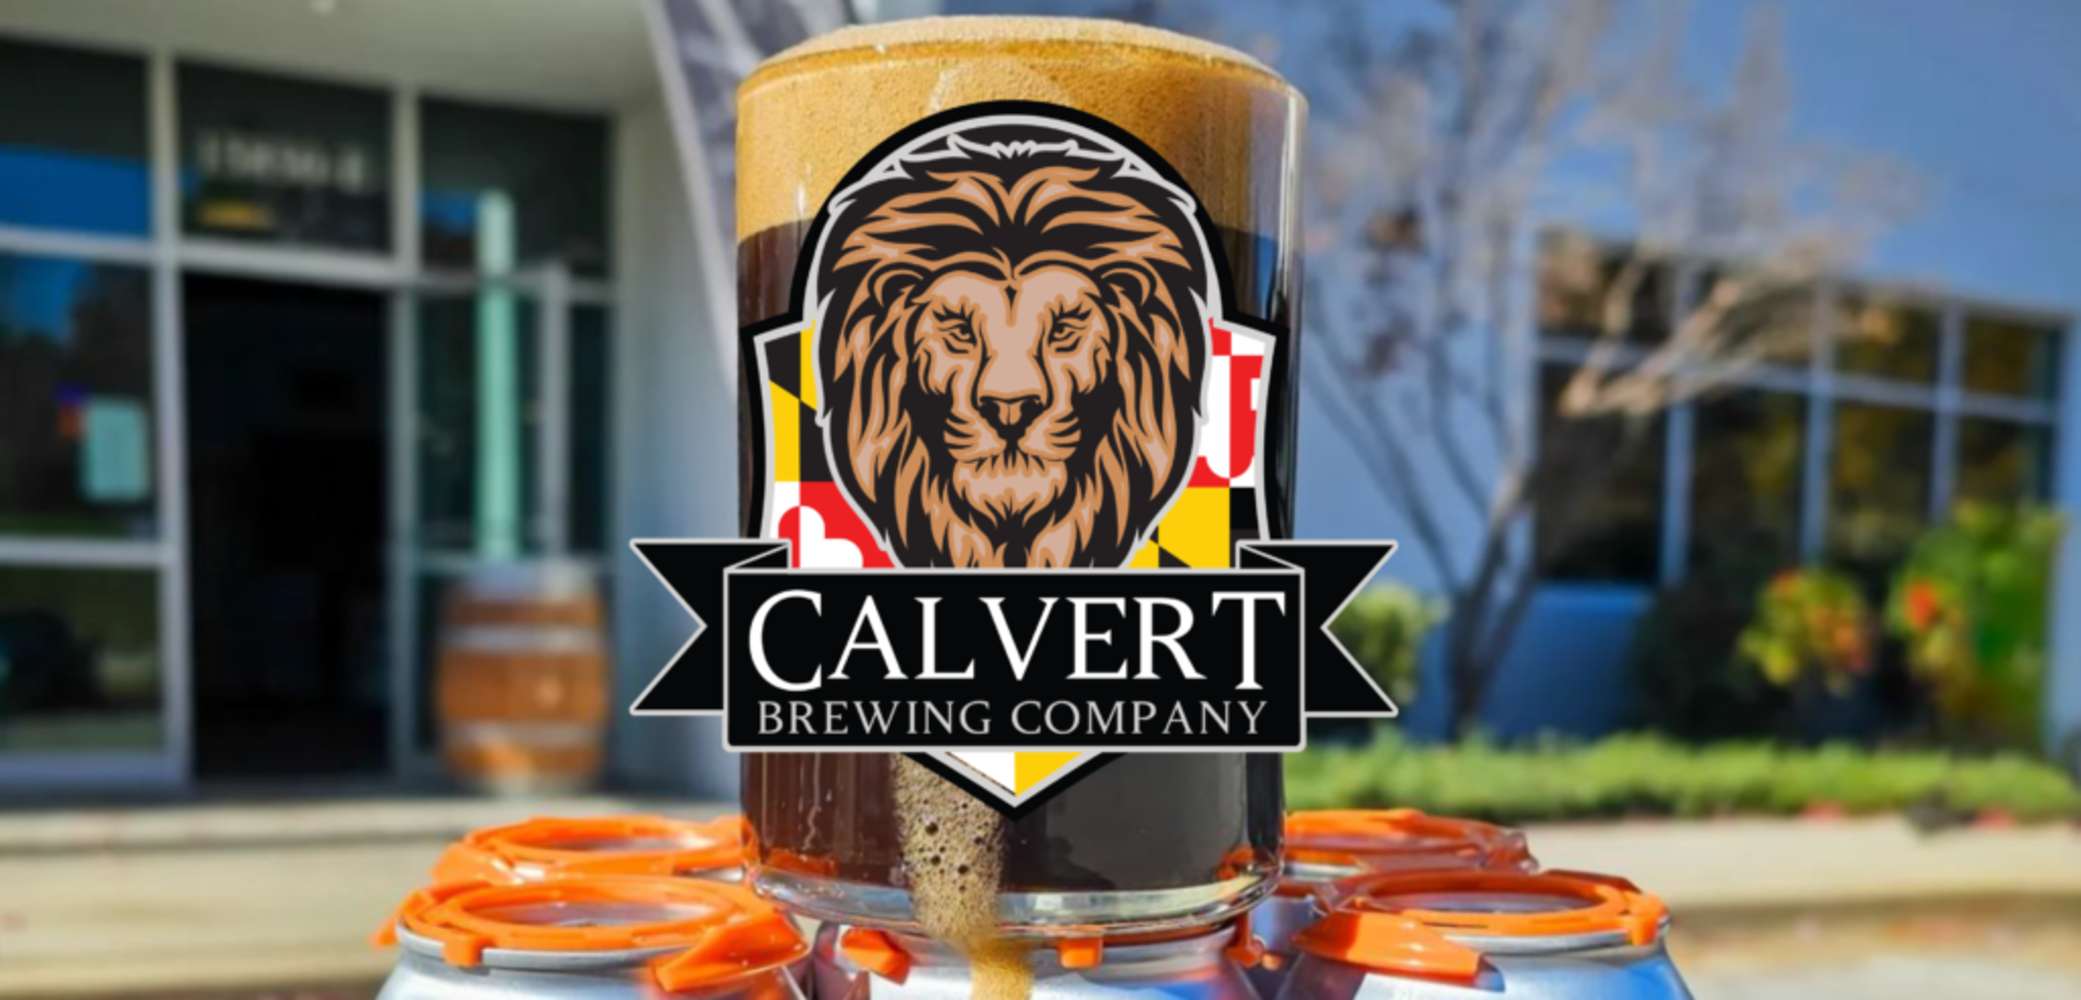 Calvert Brewing Company - 20hl IDD High Efficiency Brewhouse, Codi Can Line w/ Depal, (15) Fermenters & Brite Tanks up to 120 hl, 1000s of Kegs